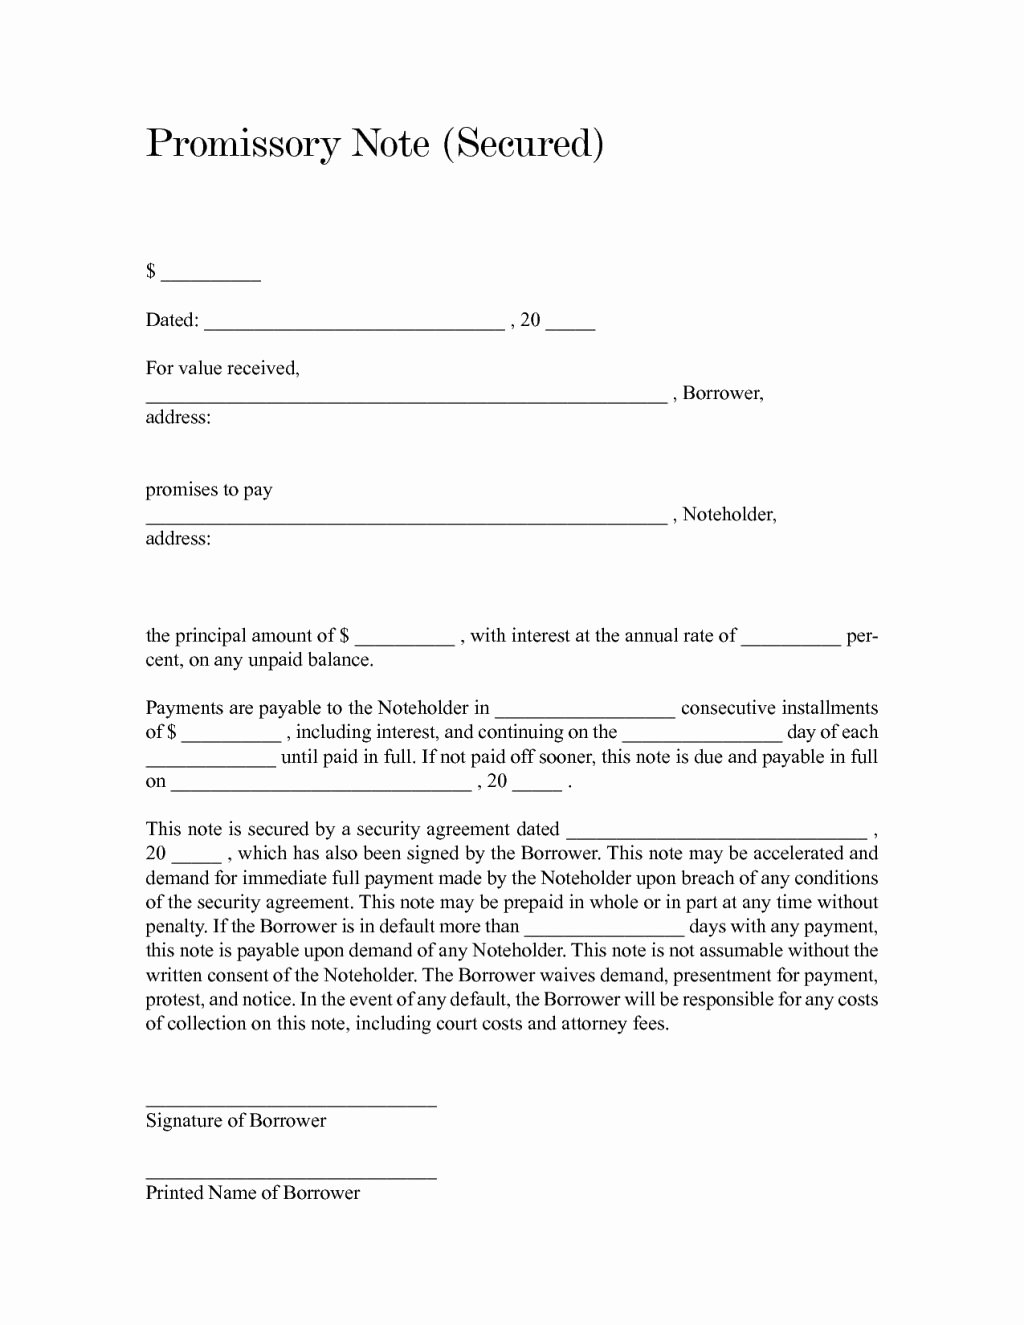 Secured Promissory Note Template Lovely Blank and Fill Able Secured Promissory Note form Sample